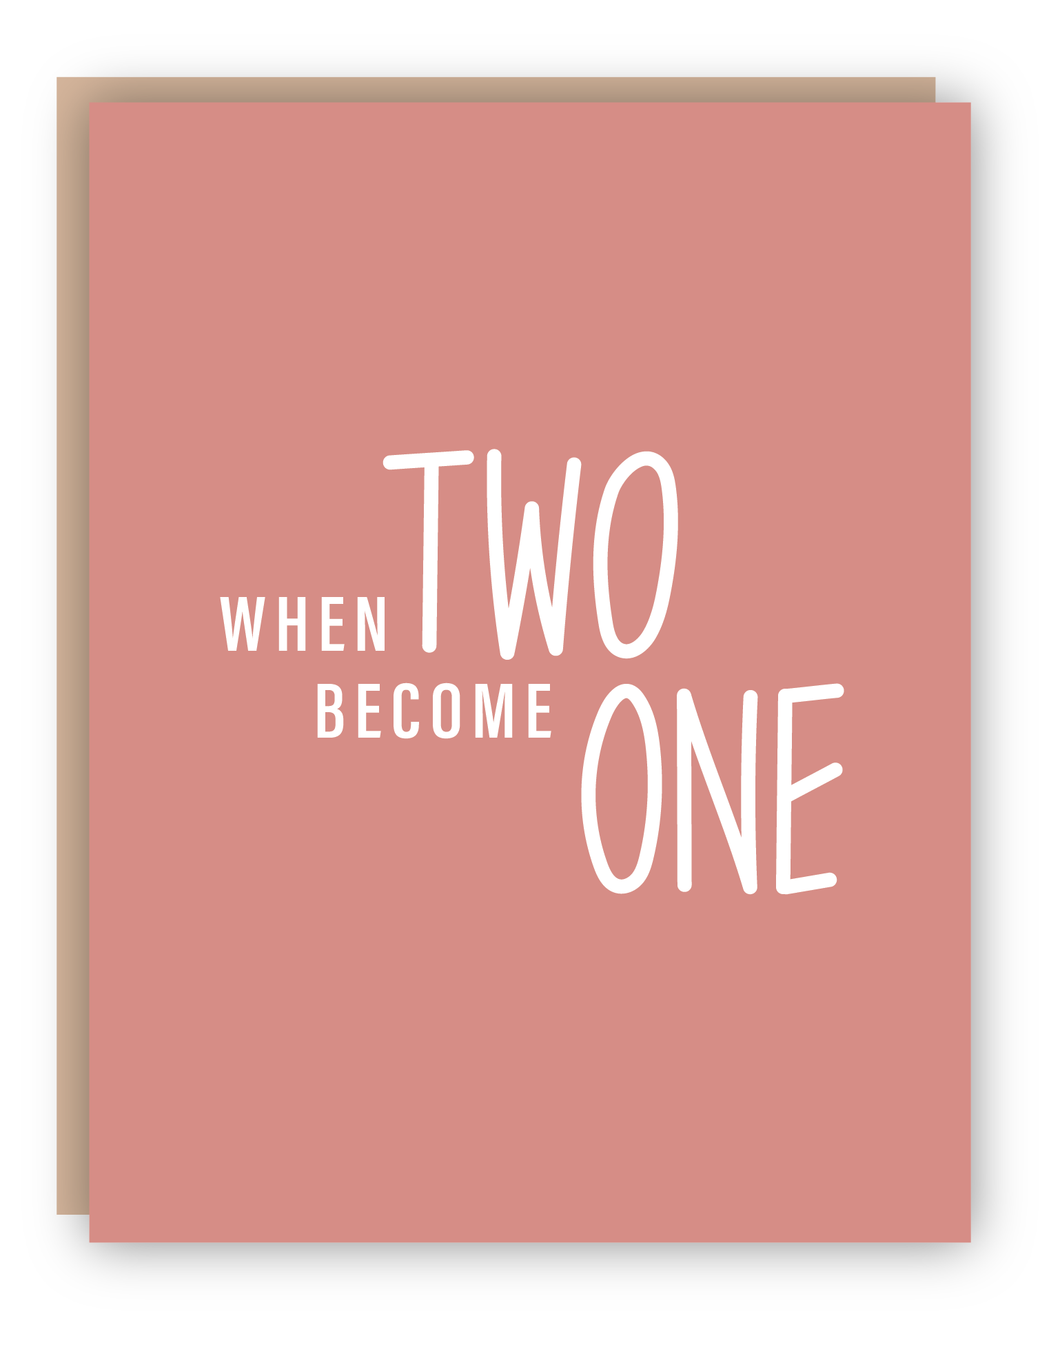 WHEN TWO